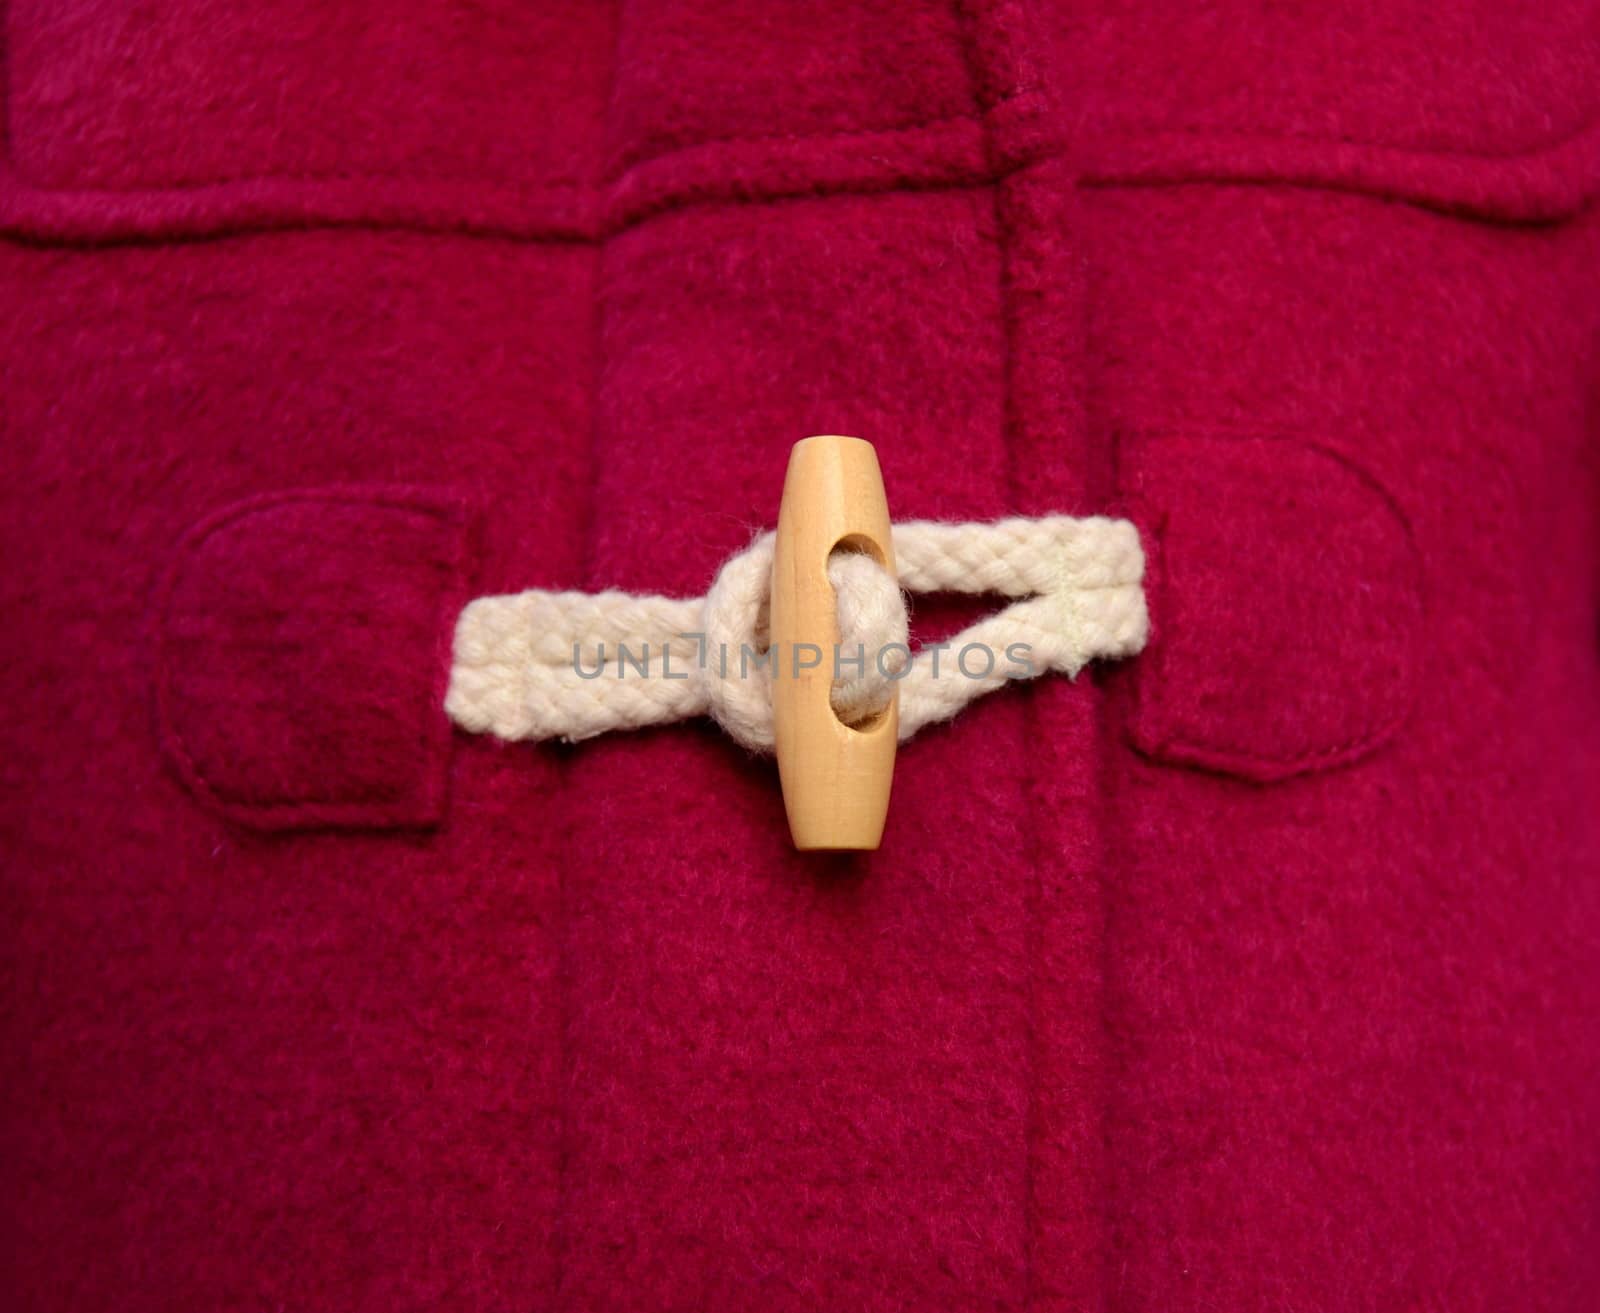 Toggle Button On A Red Duffle Coat